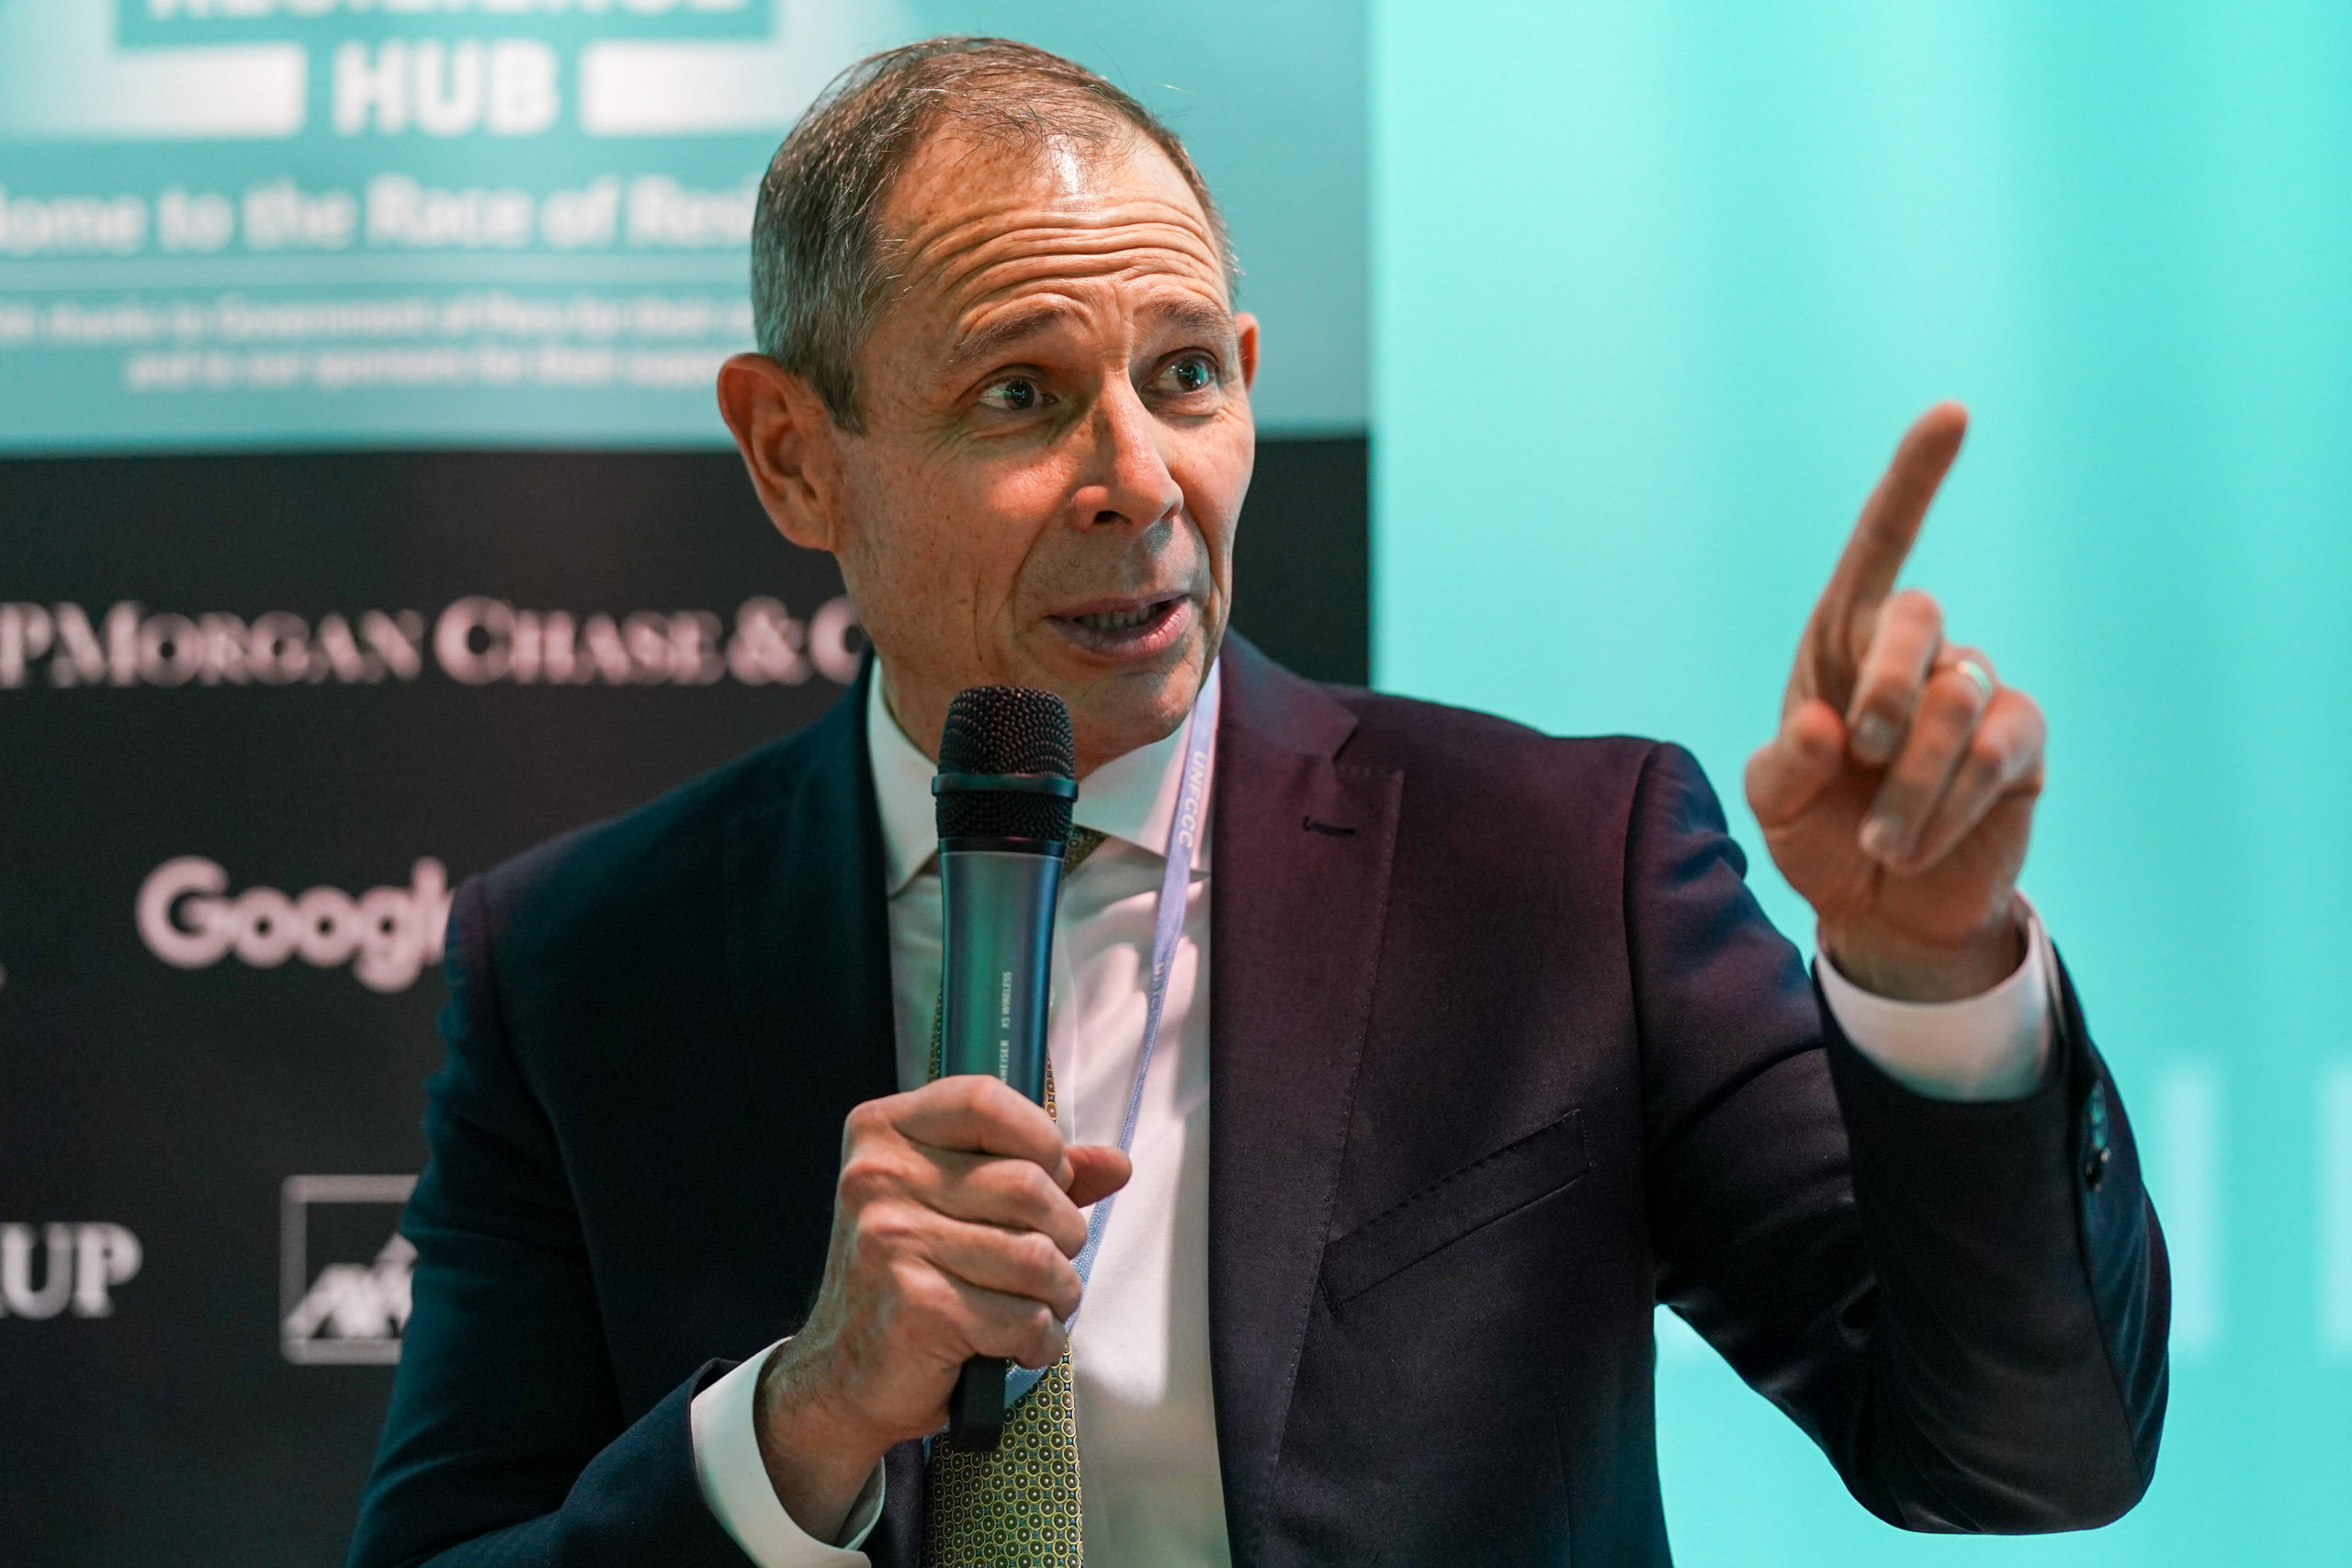 Republican Rep. John Curtis speaks at an Atlantic Council event at COP26 on Nov. 6 in Glasgow, Scotland. (Ian Forsyth/Getty Images)